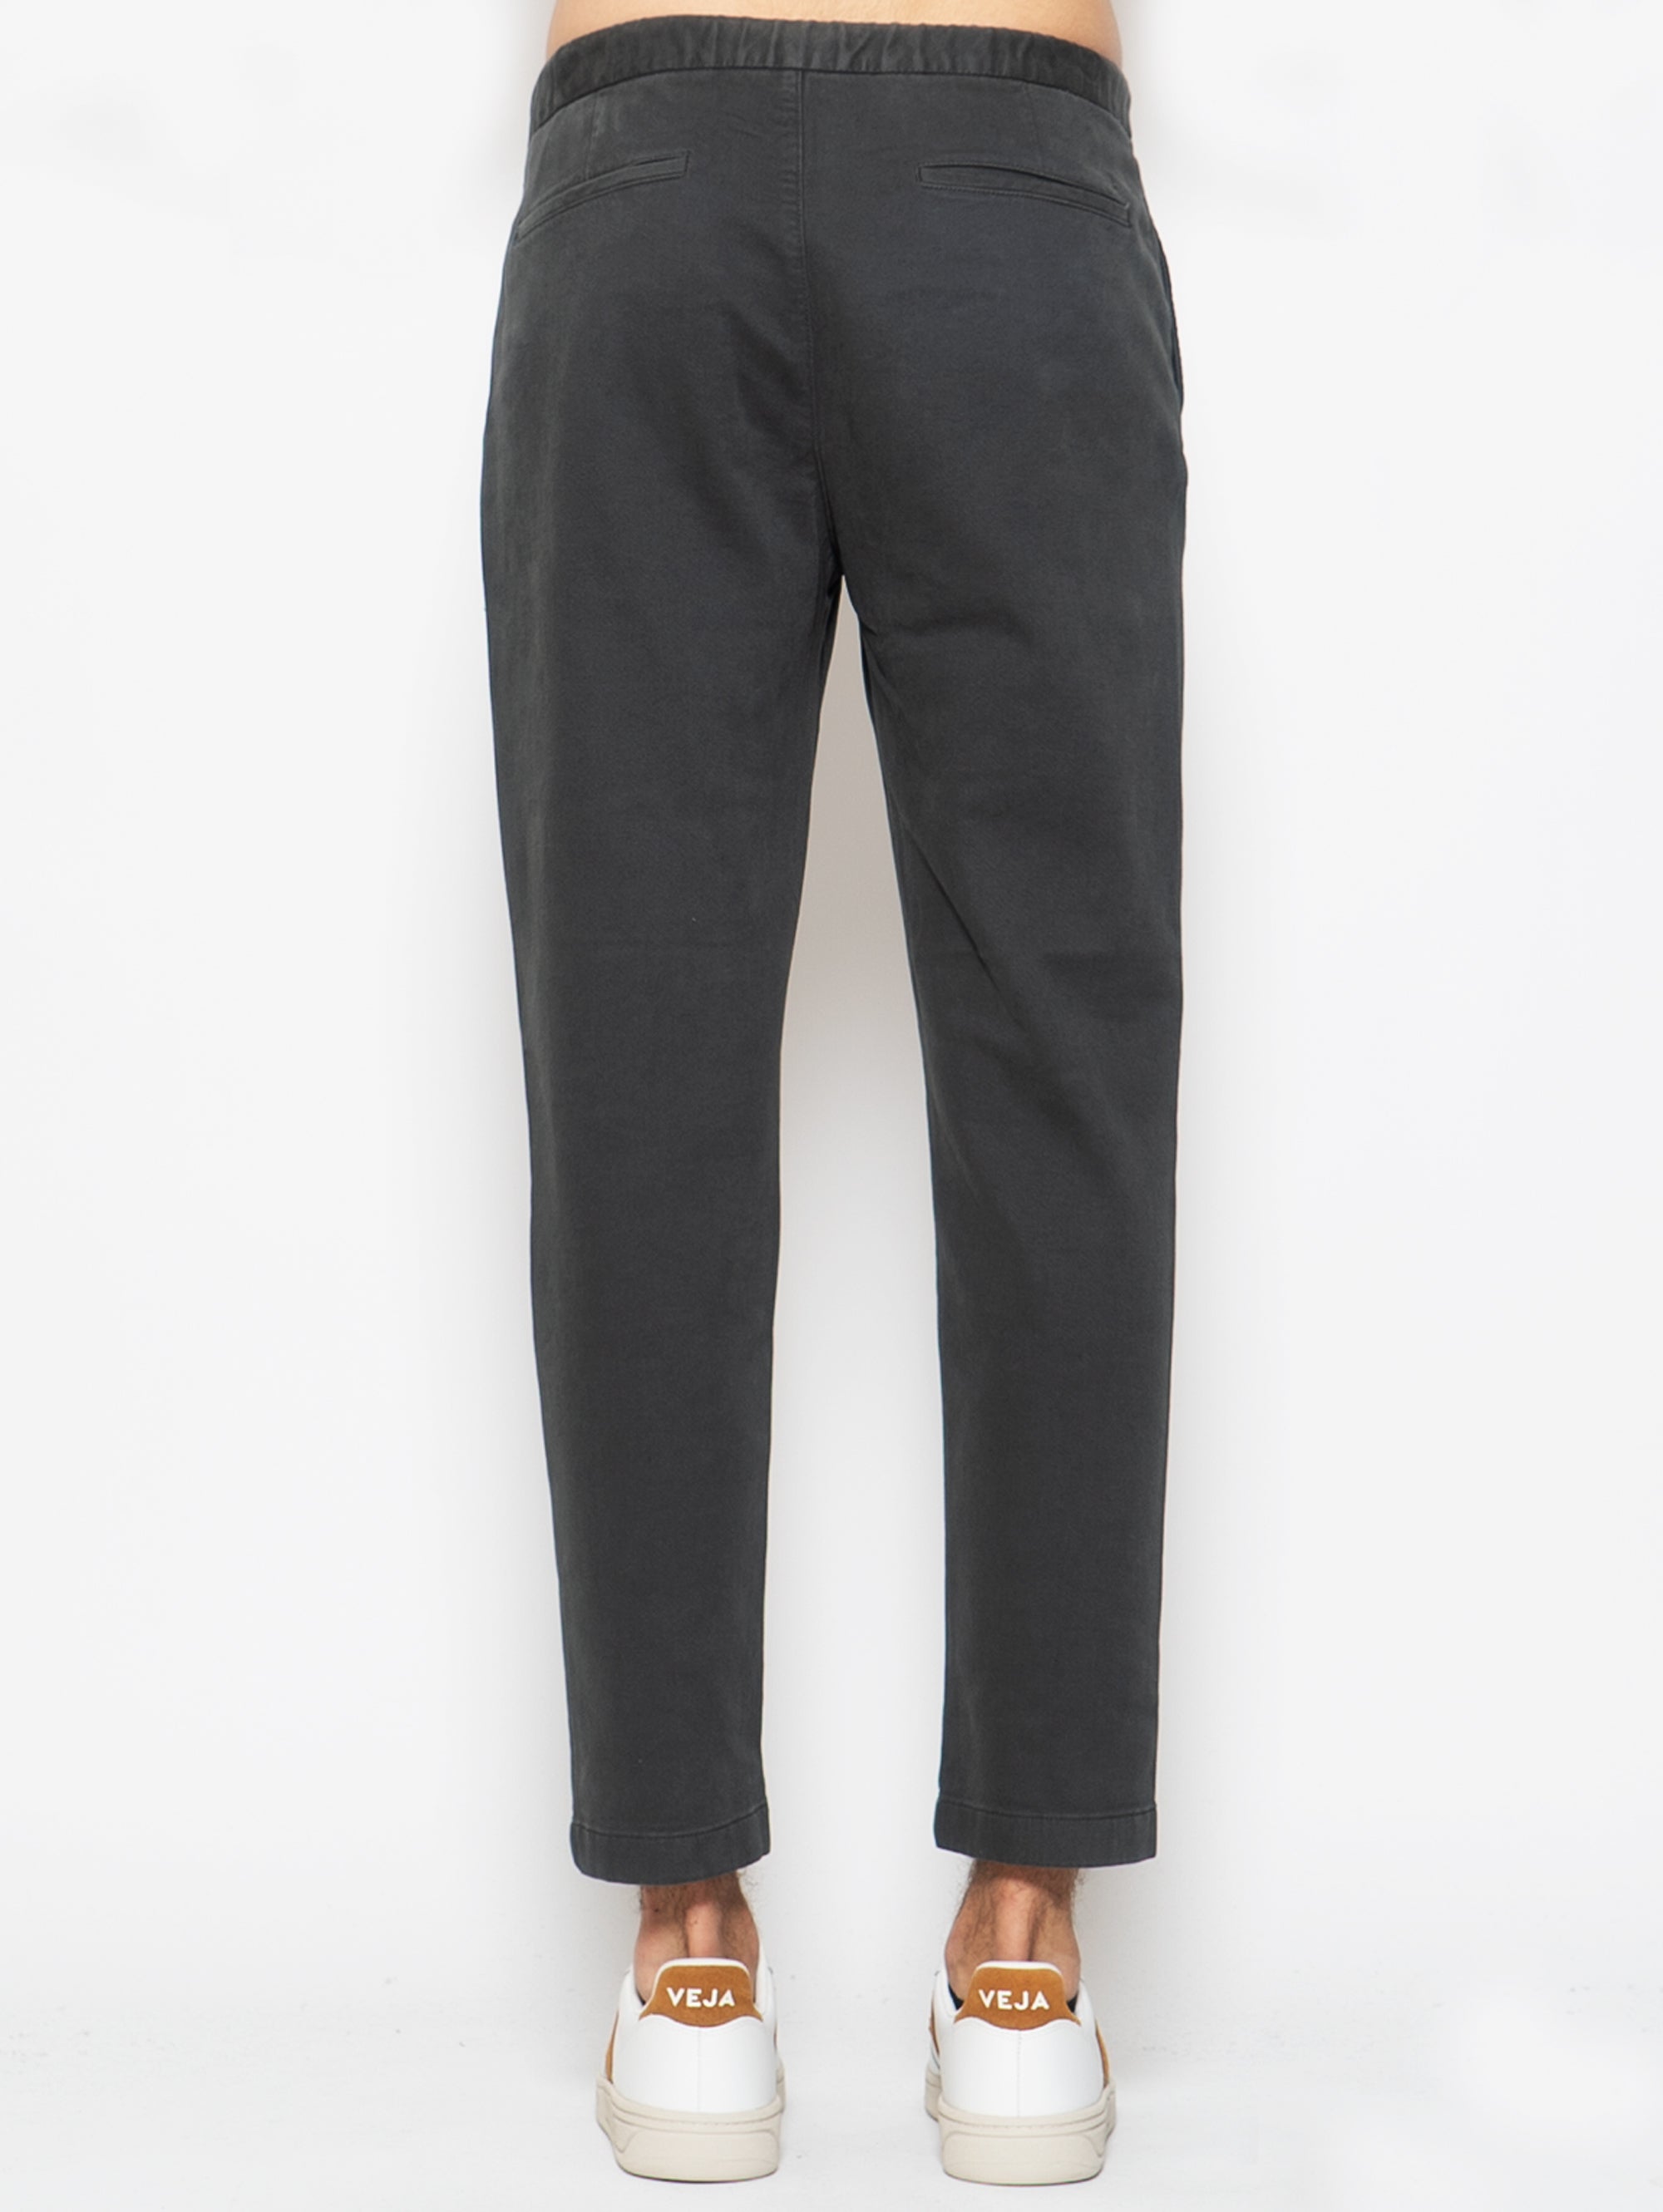 Pants with pleats and elastic waistband in Anthracite